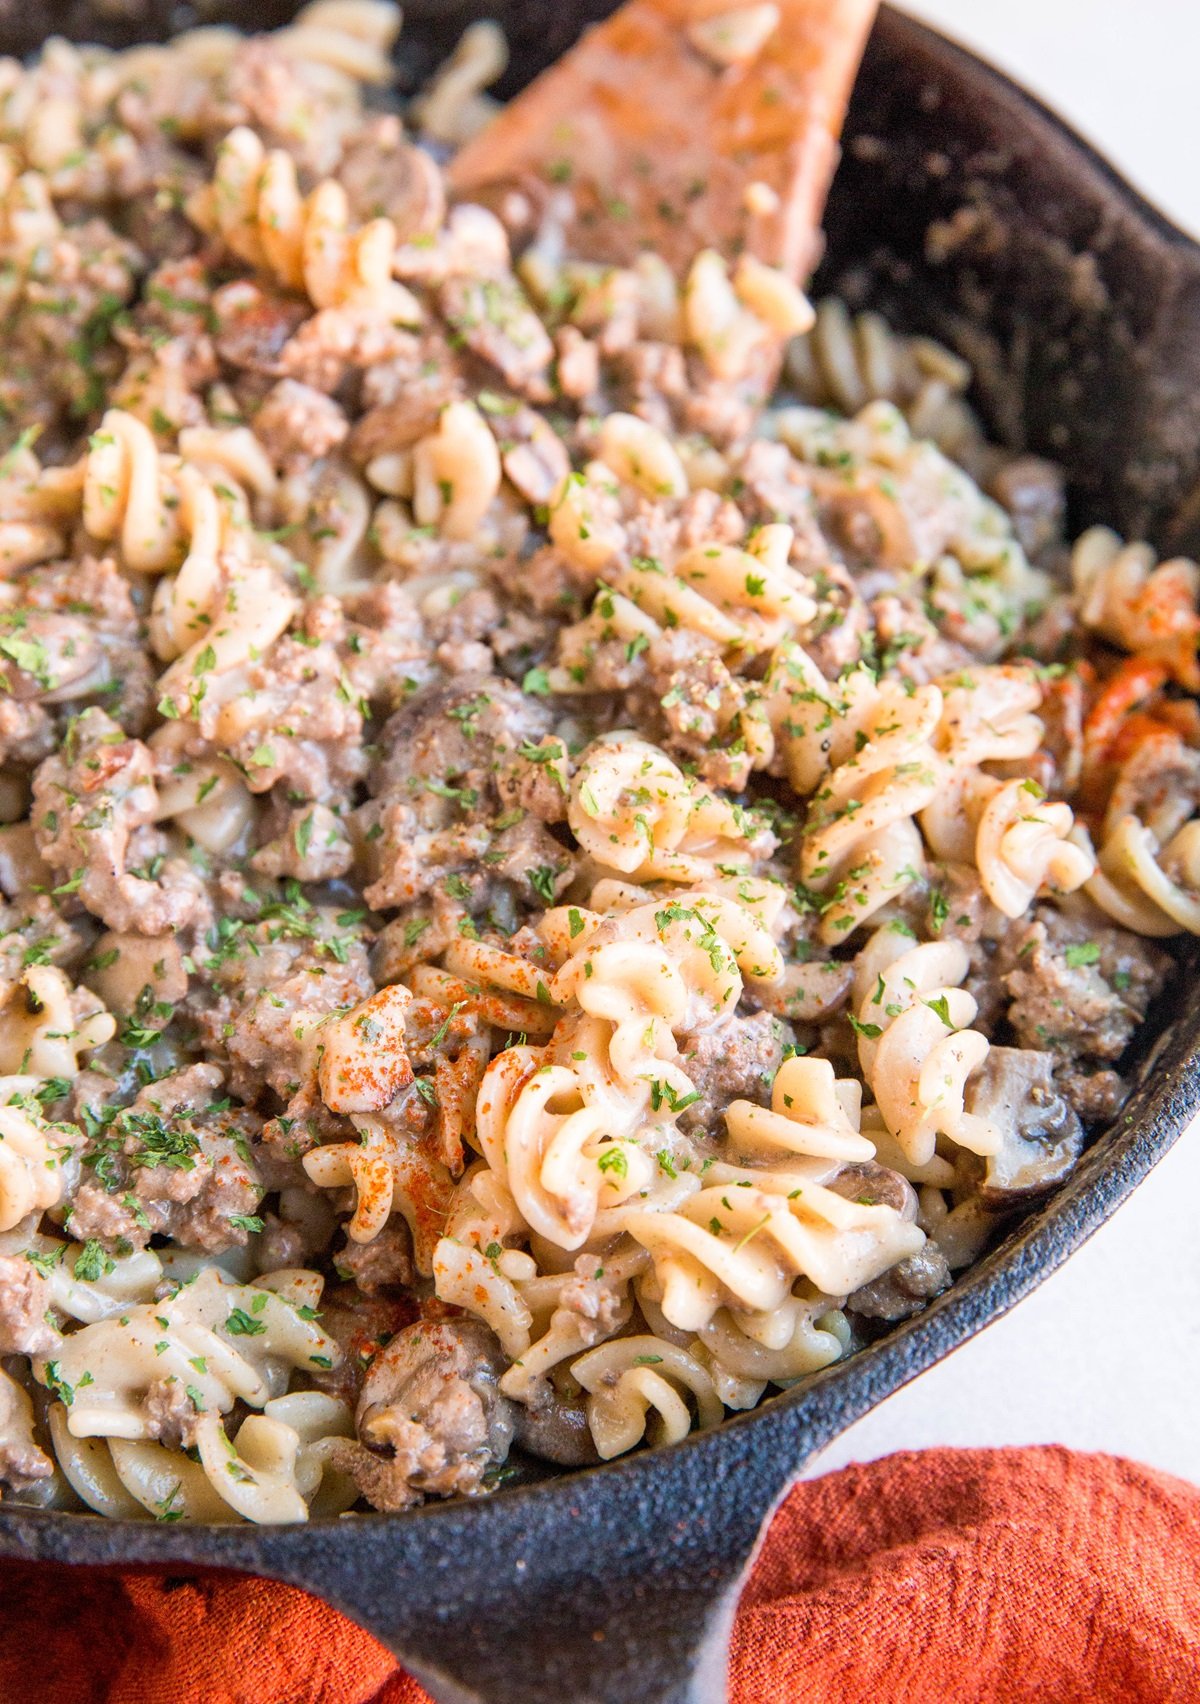 Cast iron skillet with ground beef stroganoff in it, ready to serve.